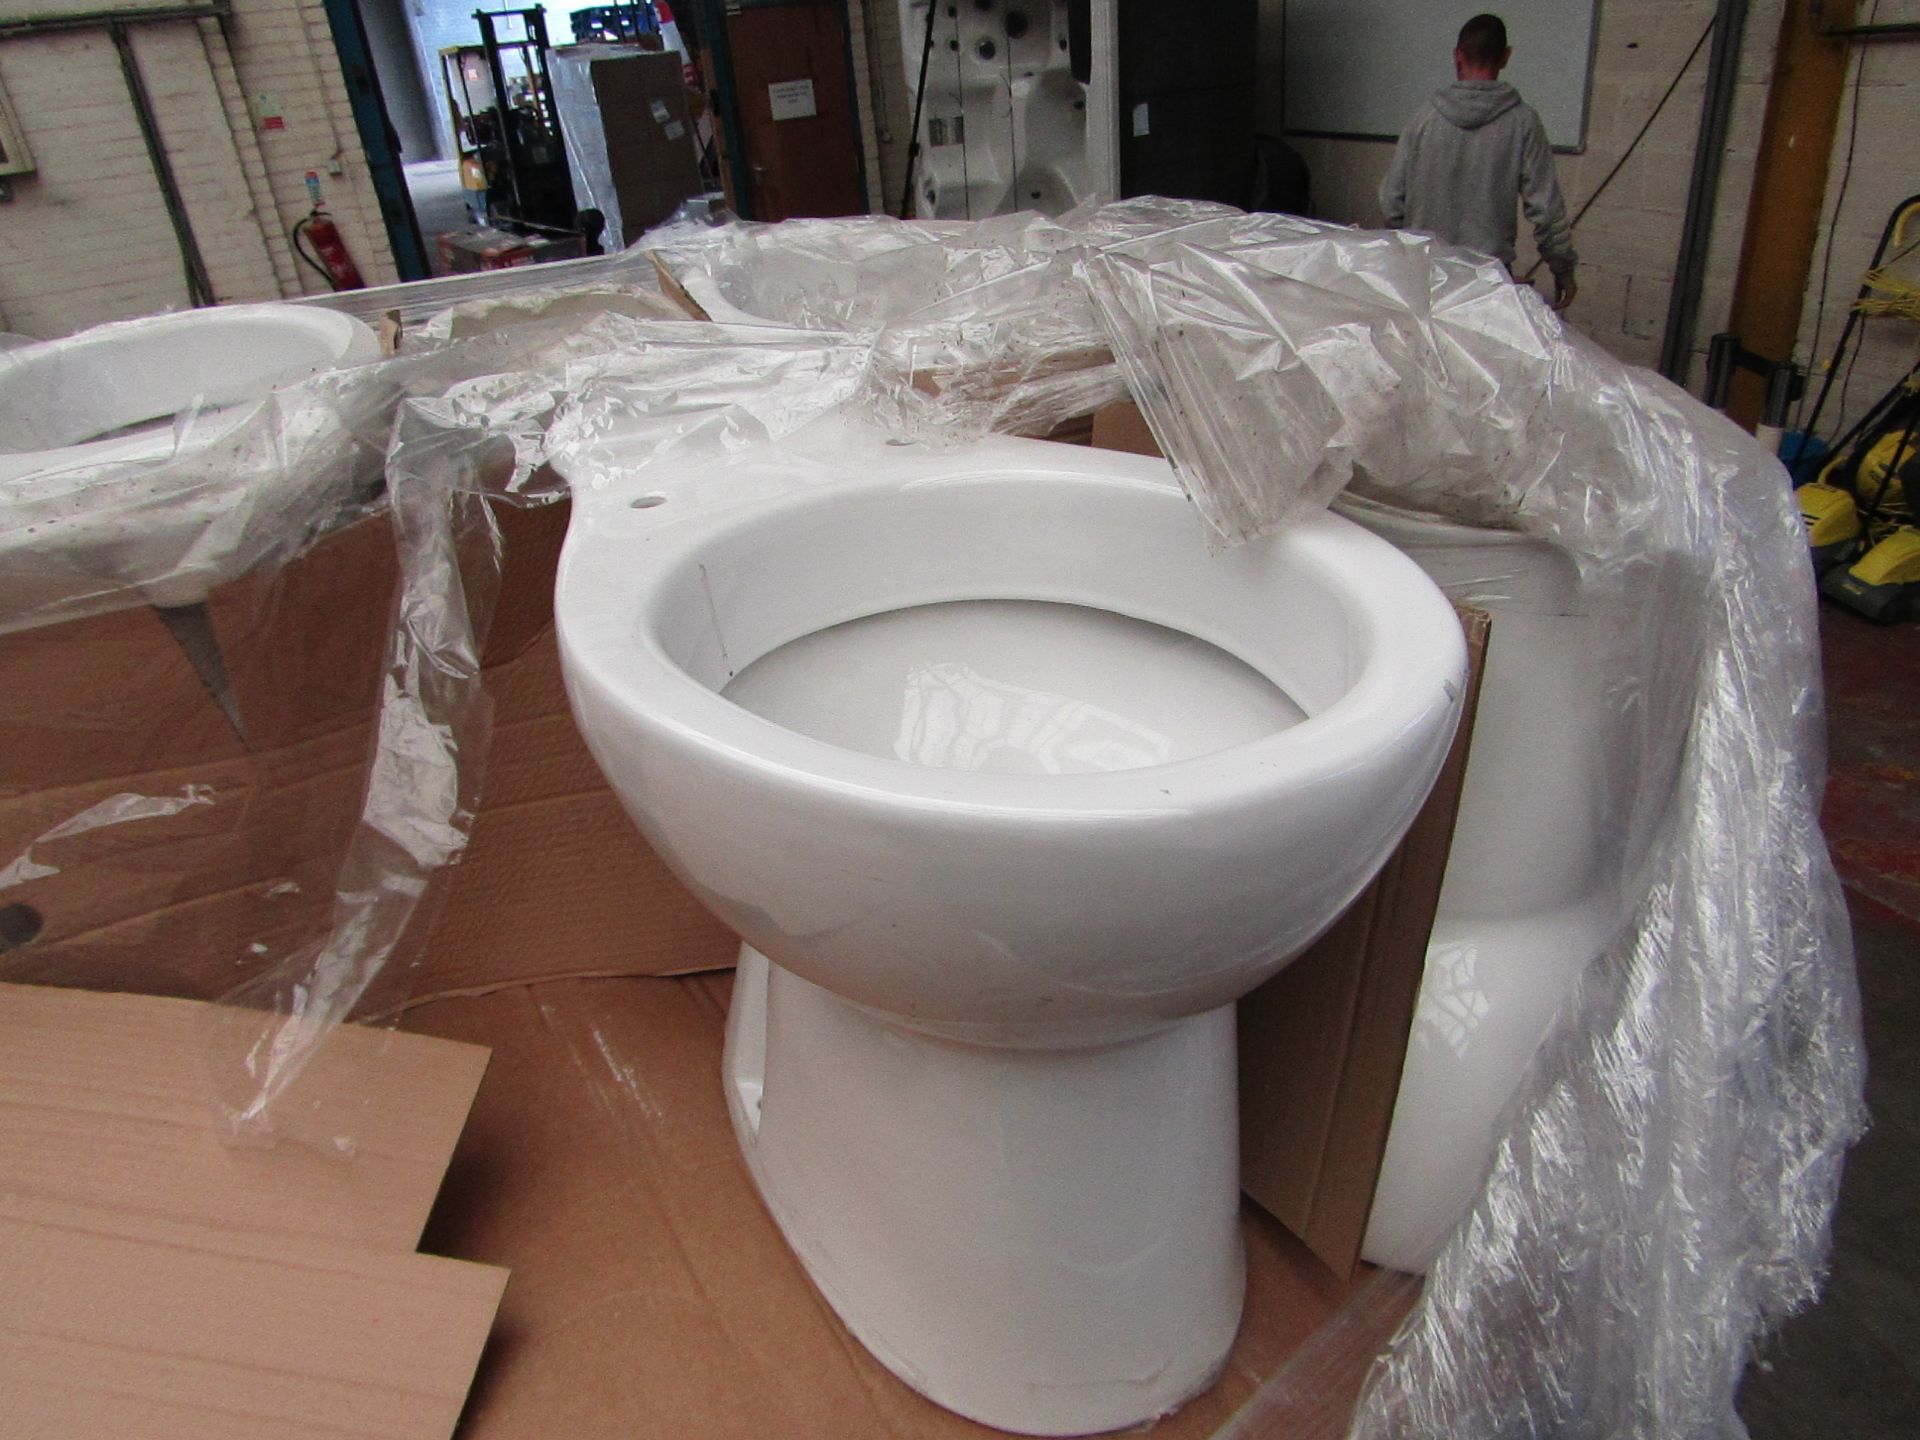 Unbranded Roca Close Coupled Toilet which includes Cistern, Pan, Flush system and toilet seat, all